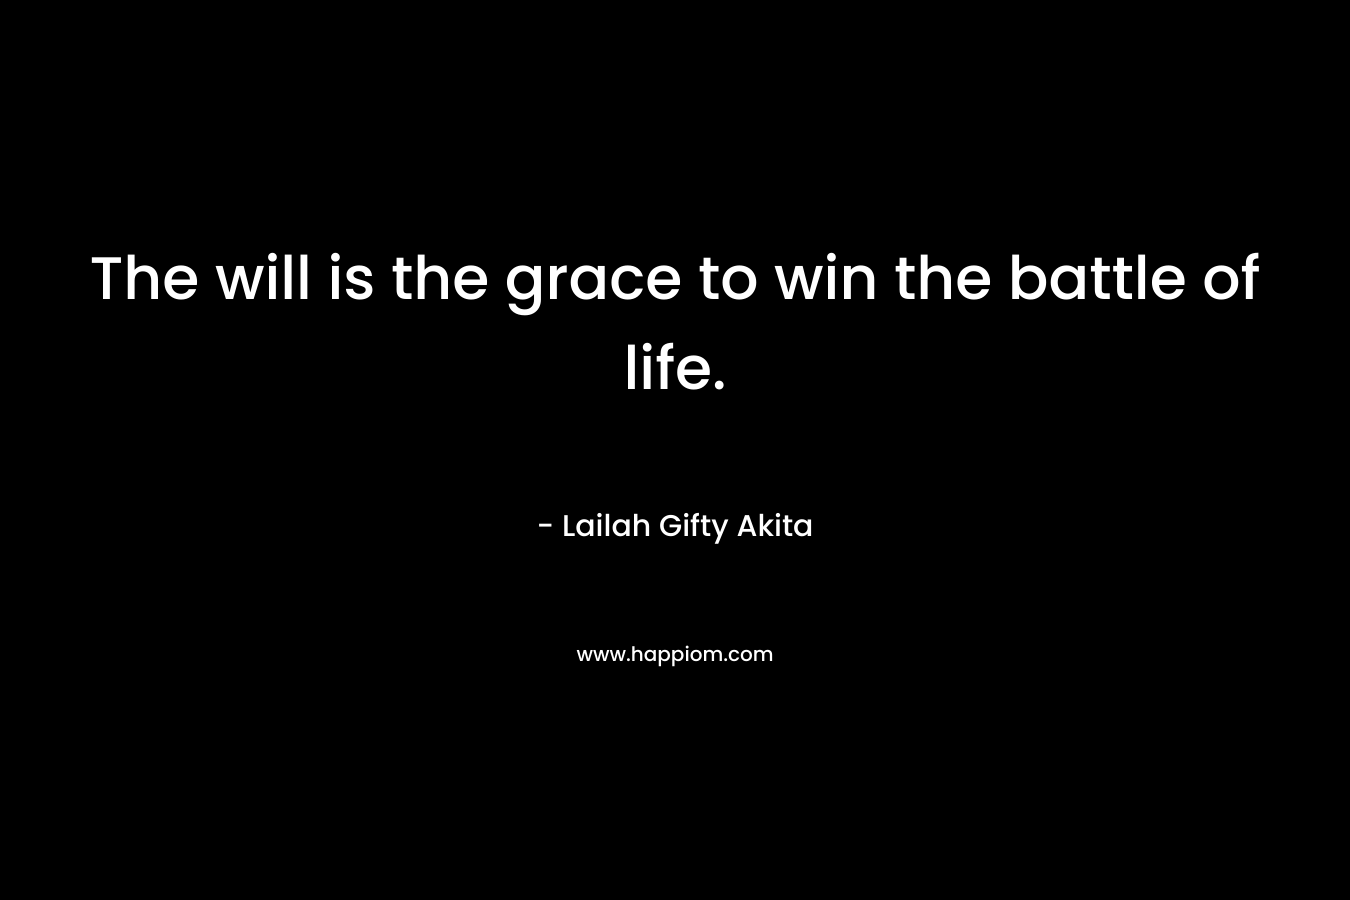 The will is the grace to win the battle of life.